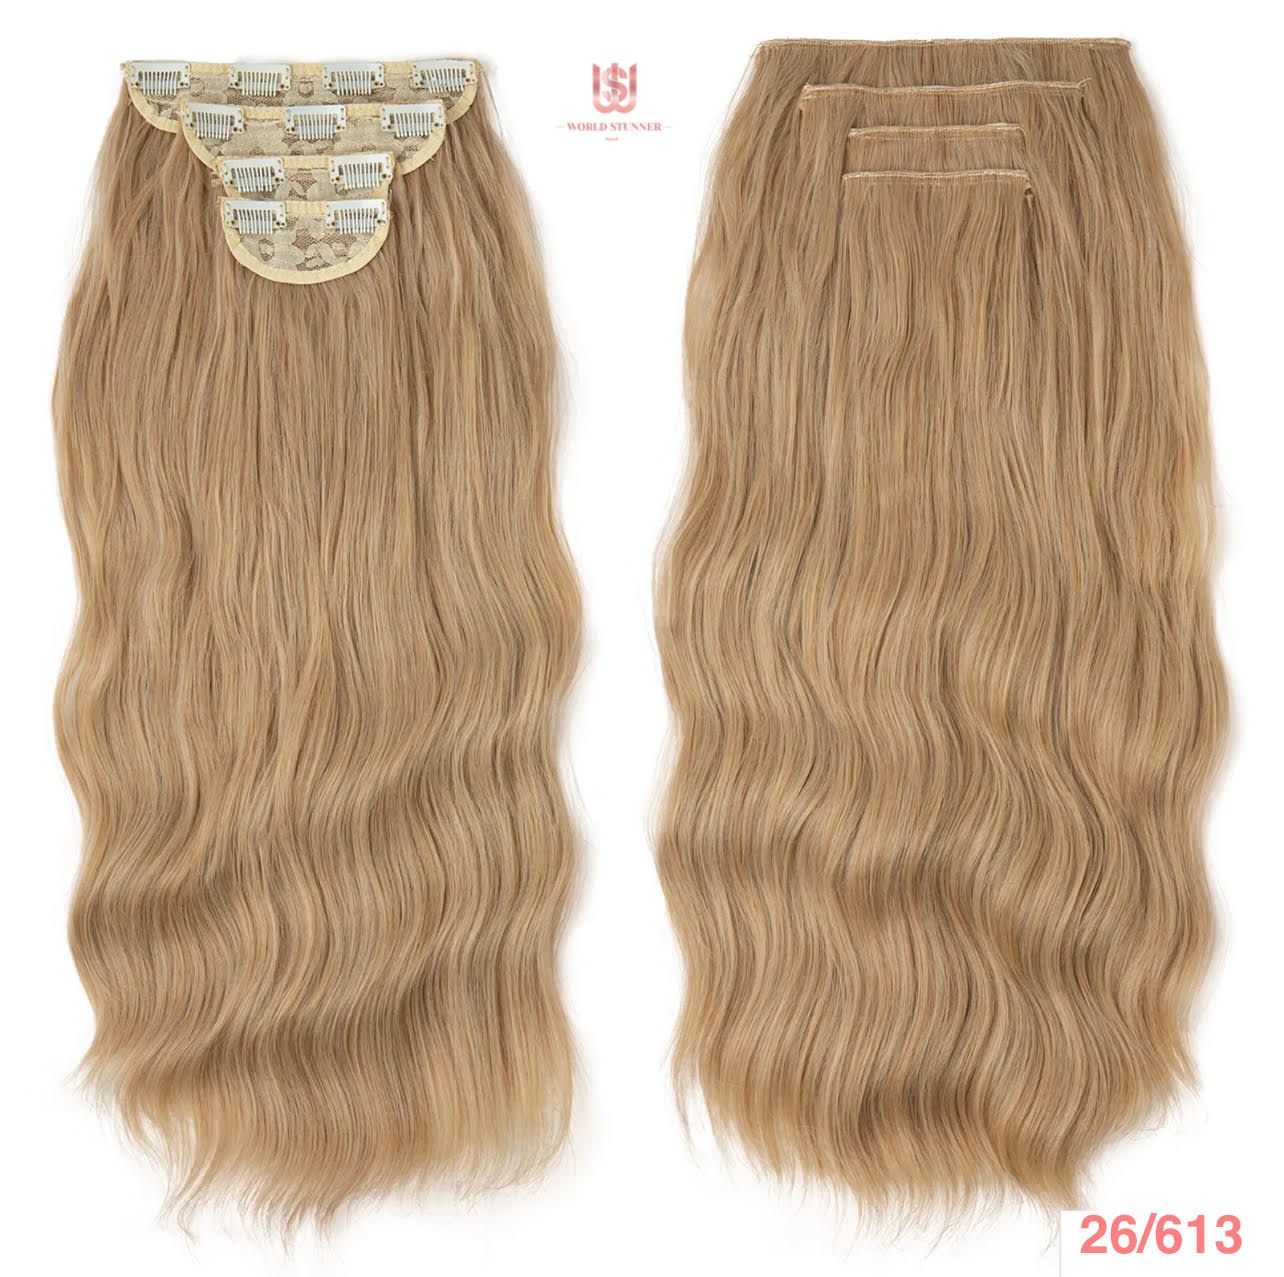 26/613 - SUPER THICK 22” 4 PIECE WAIST Length WAVE CLIPS IN HAIR Extensions